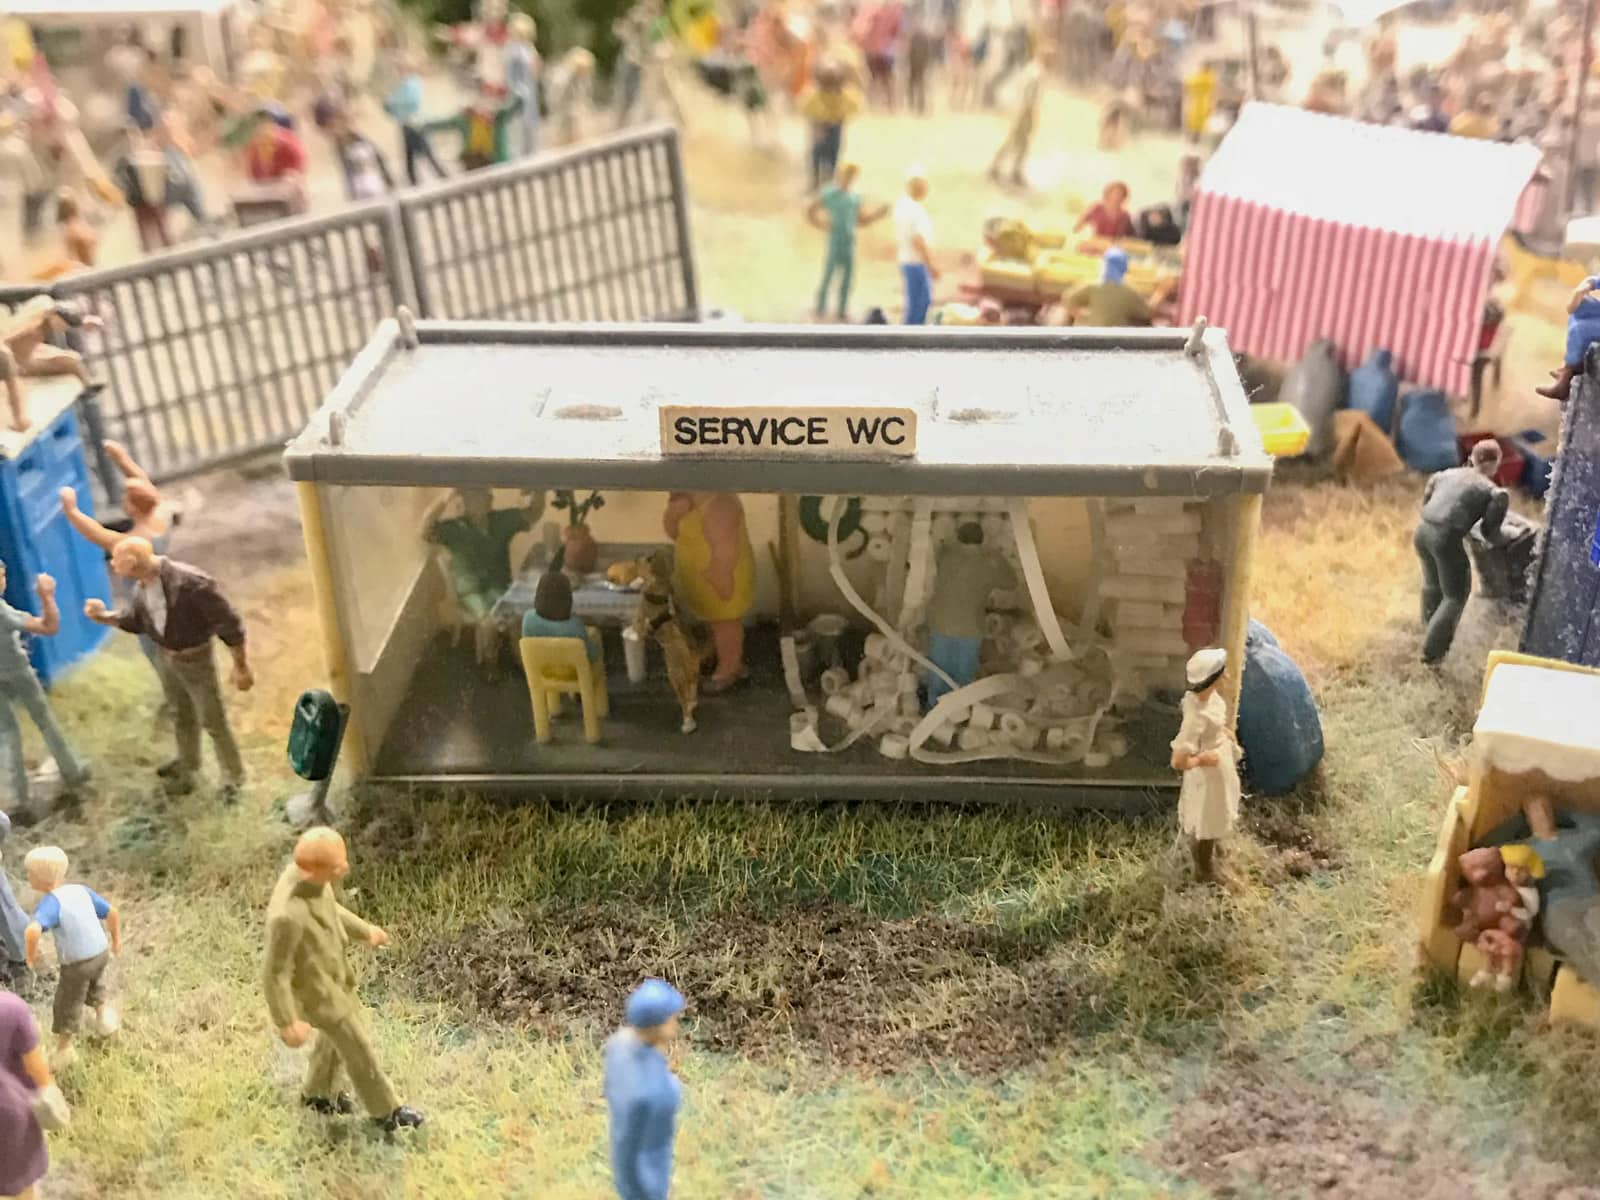 Miniature figurines inside a glass-walled block called “Service WC”. There is a figurine man who seems to be dealing with a shelf of toilet paper